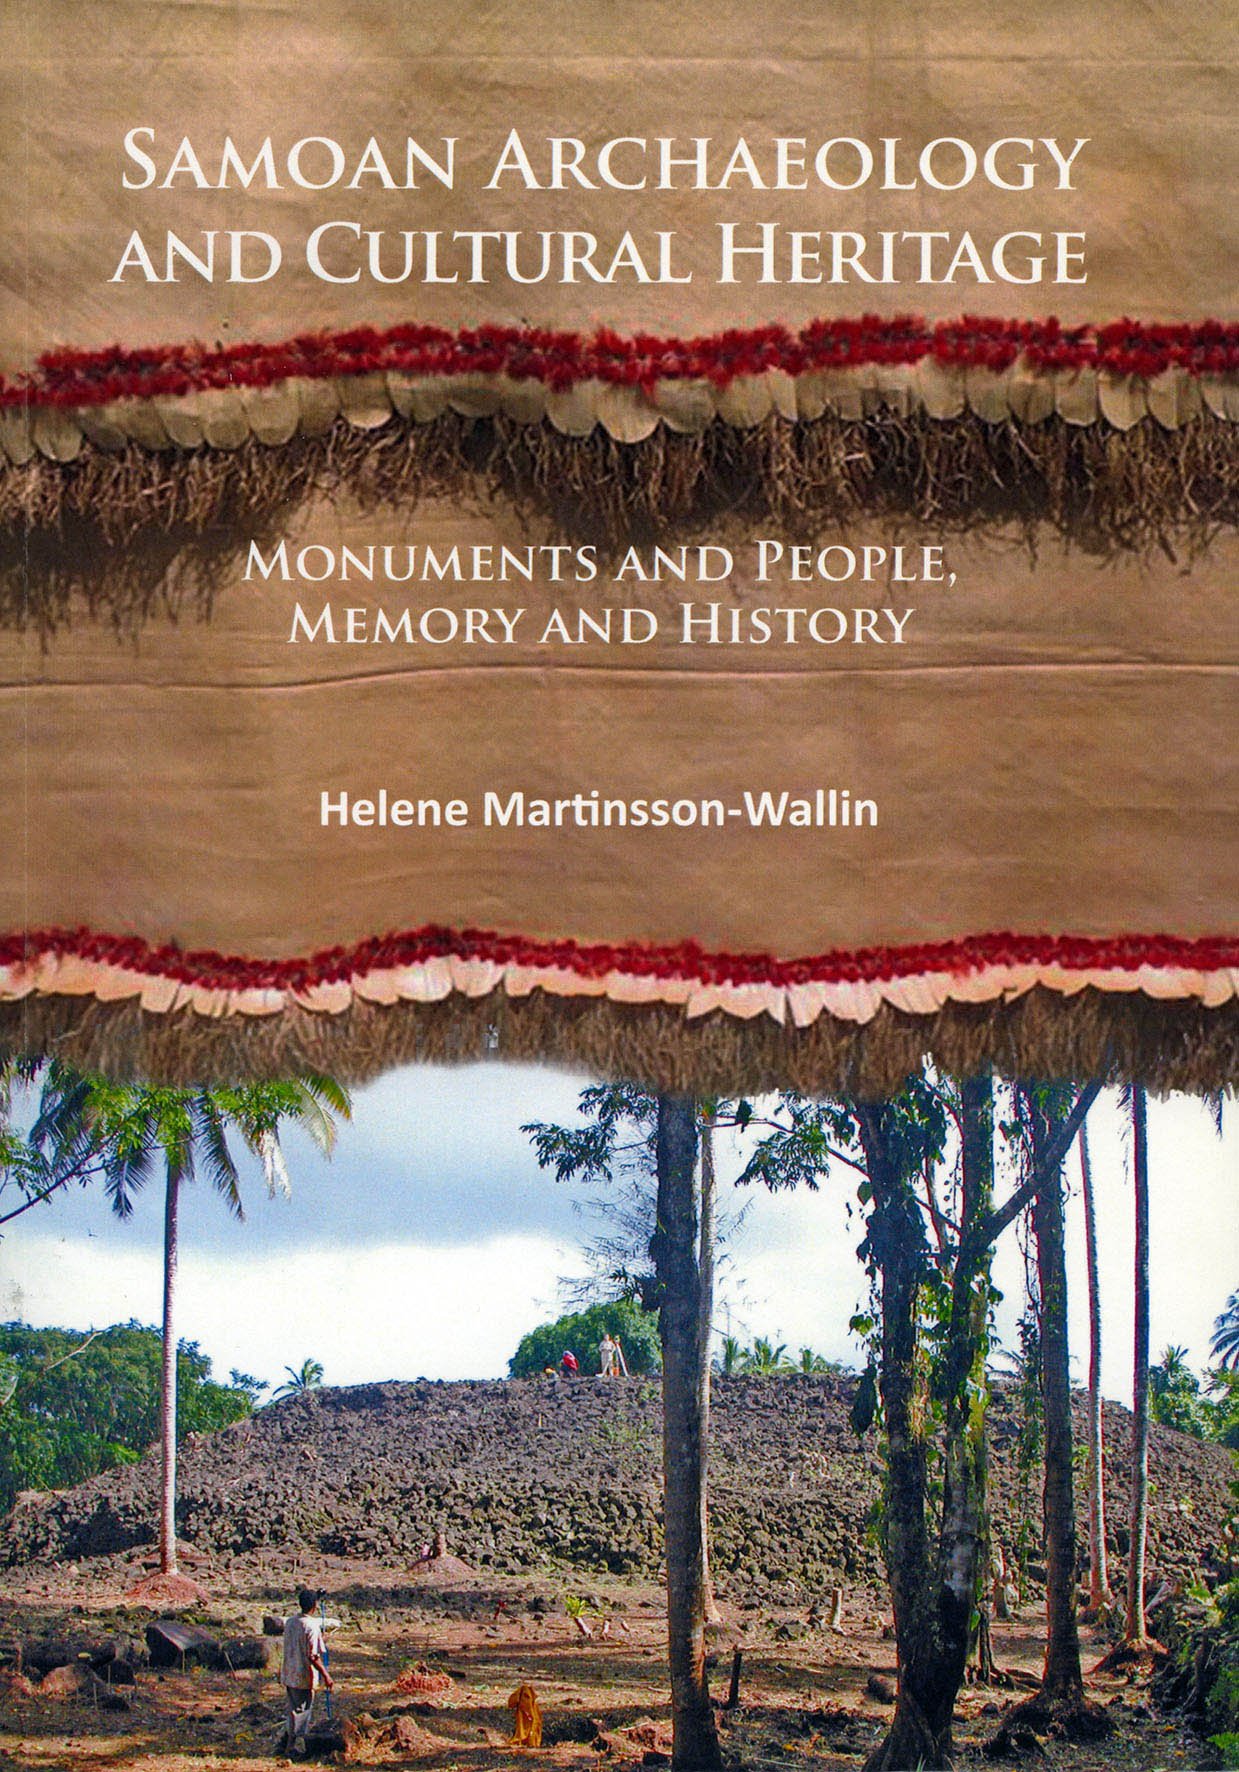 Samoan Archaeology and Cultural Heritage. Monuments and People